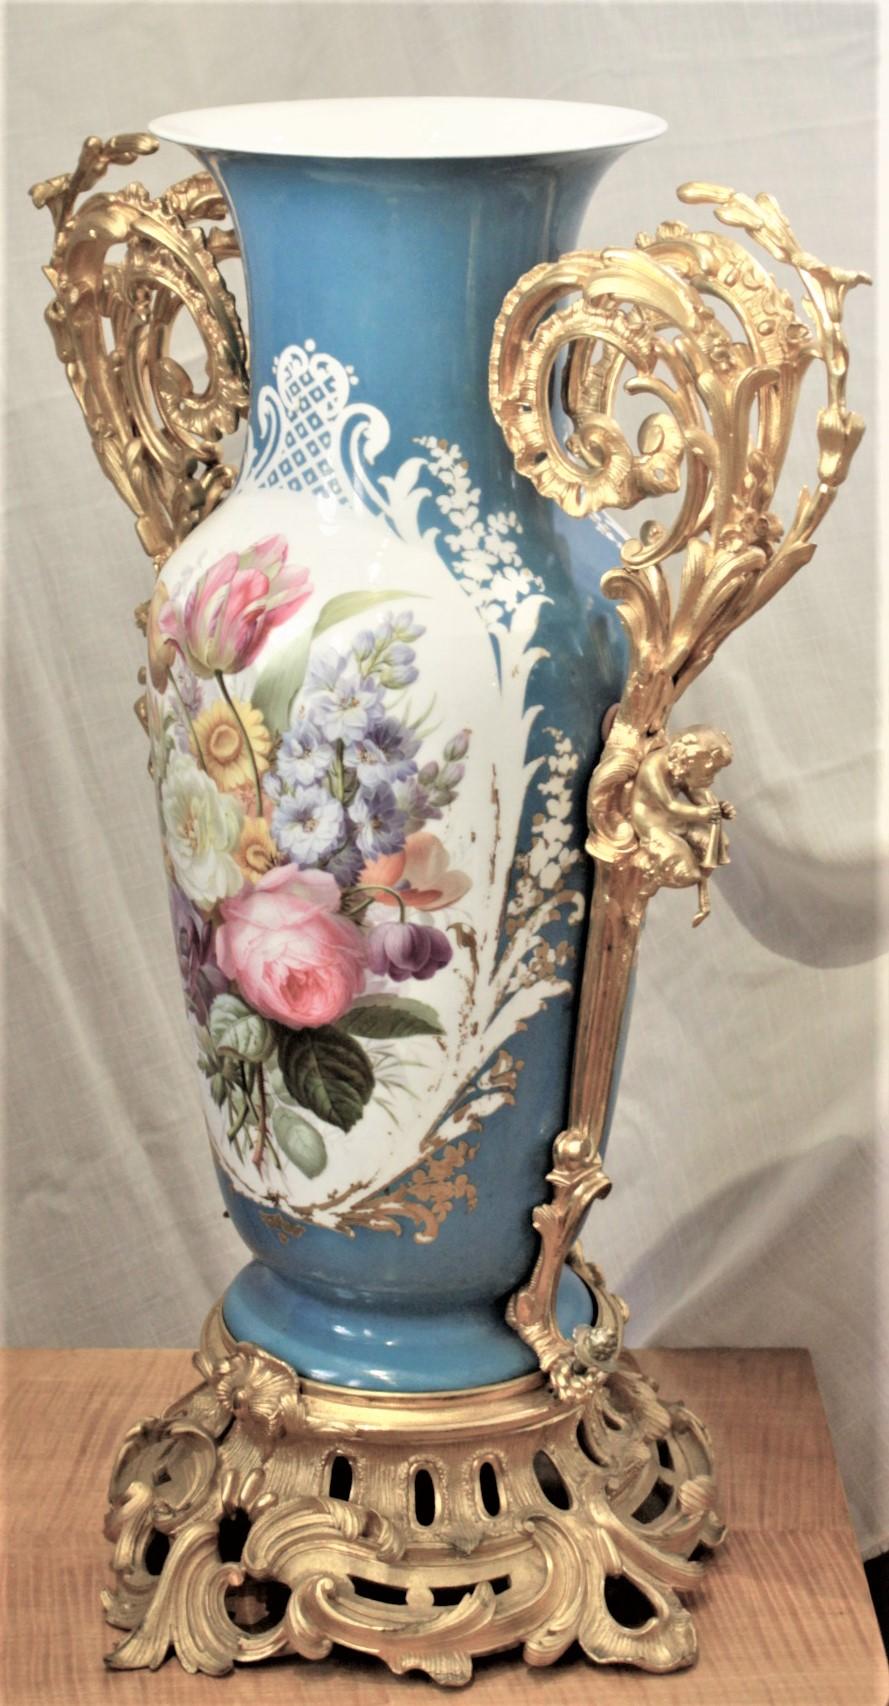 Large Antique Sevres Styled Hand-Painted Porcelain Vase with Gilt Bronze Mounts In Good Condition For Sale In Hamilton, Ontario